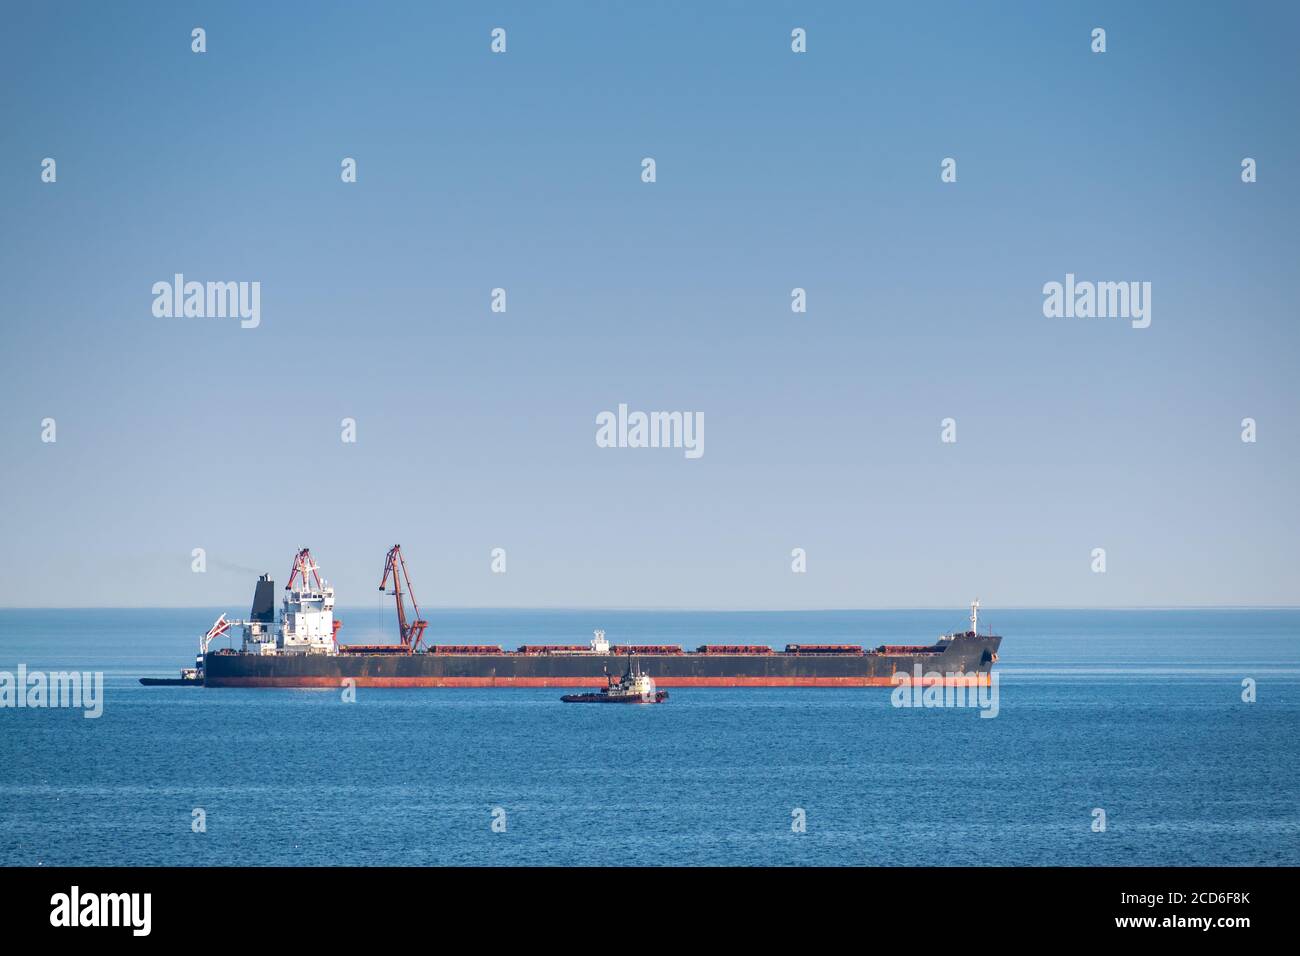 Bulk carrier ship is being loaded at sea Stock Photo